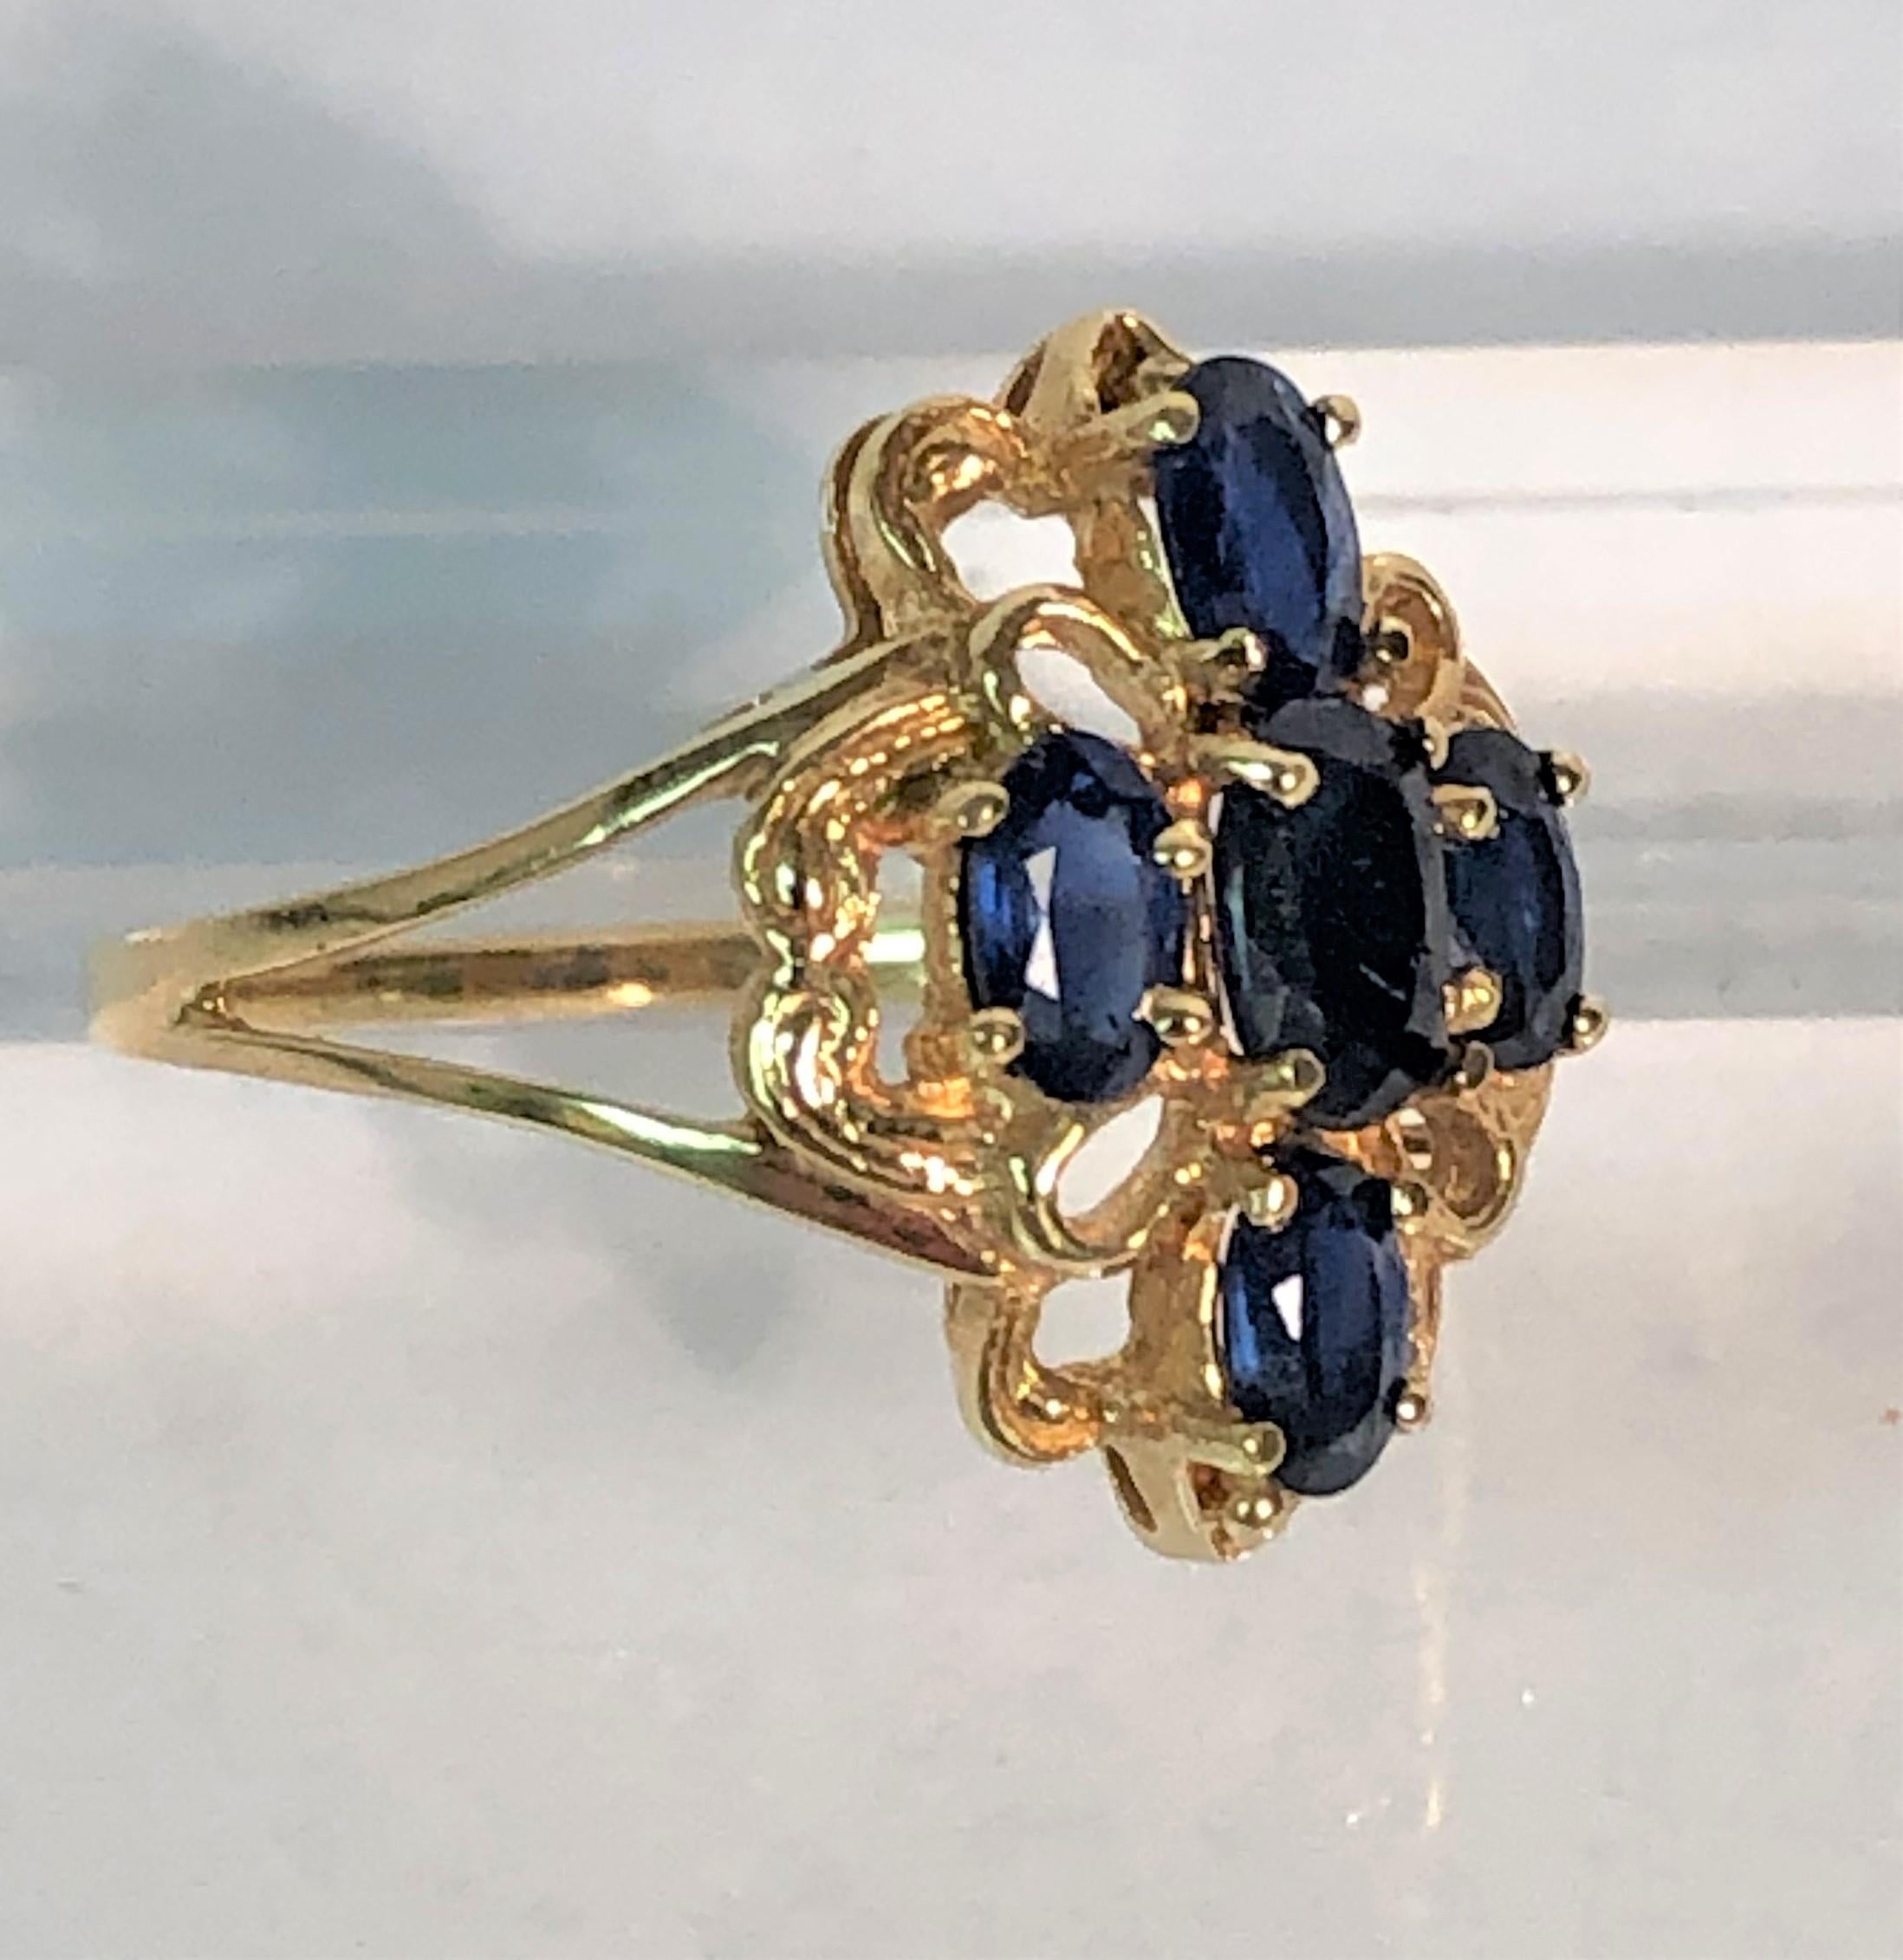 This beautiful sapphire ring is perfect for every day!
14 karat yellow gold elegant filigree setting. 
Split shank.
5 oval sapphires ranging from approximately .20ct to .30ct each, approximately 1.10 tcw
Stamped 